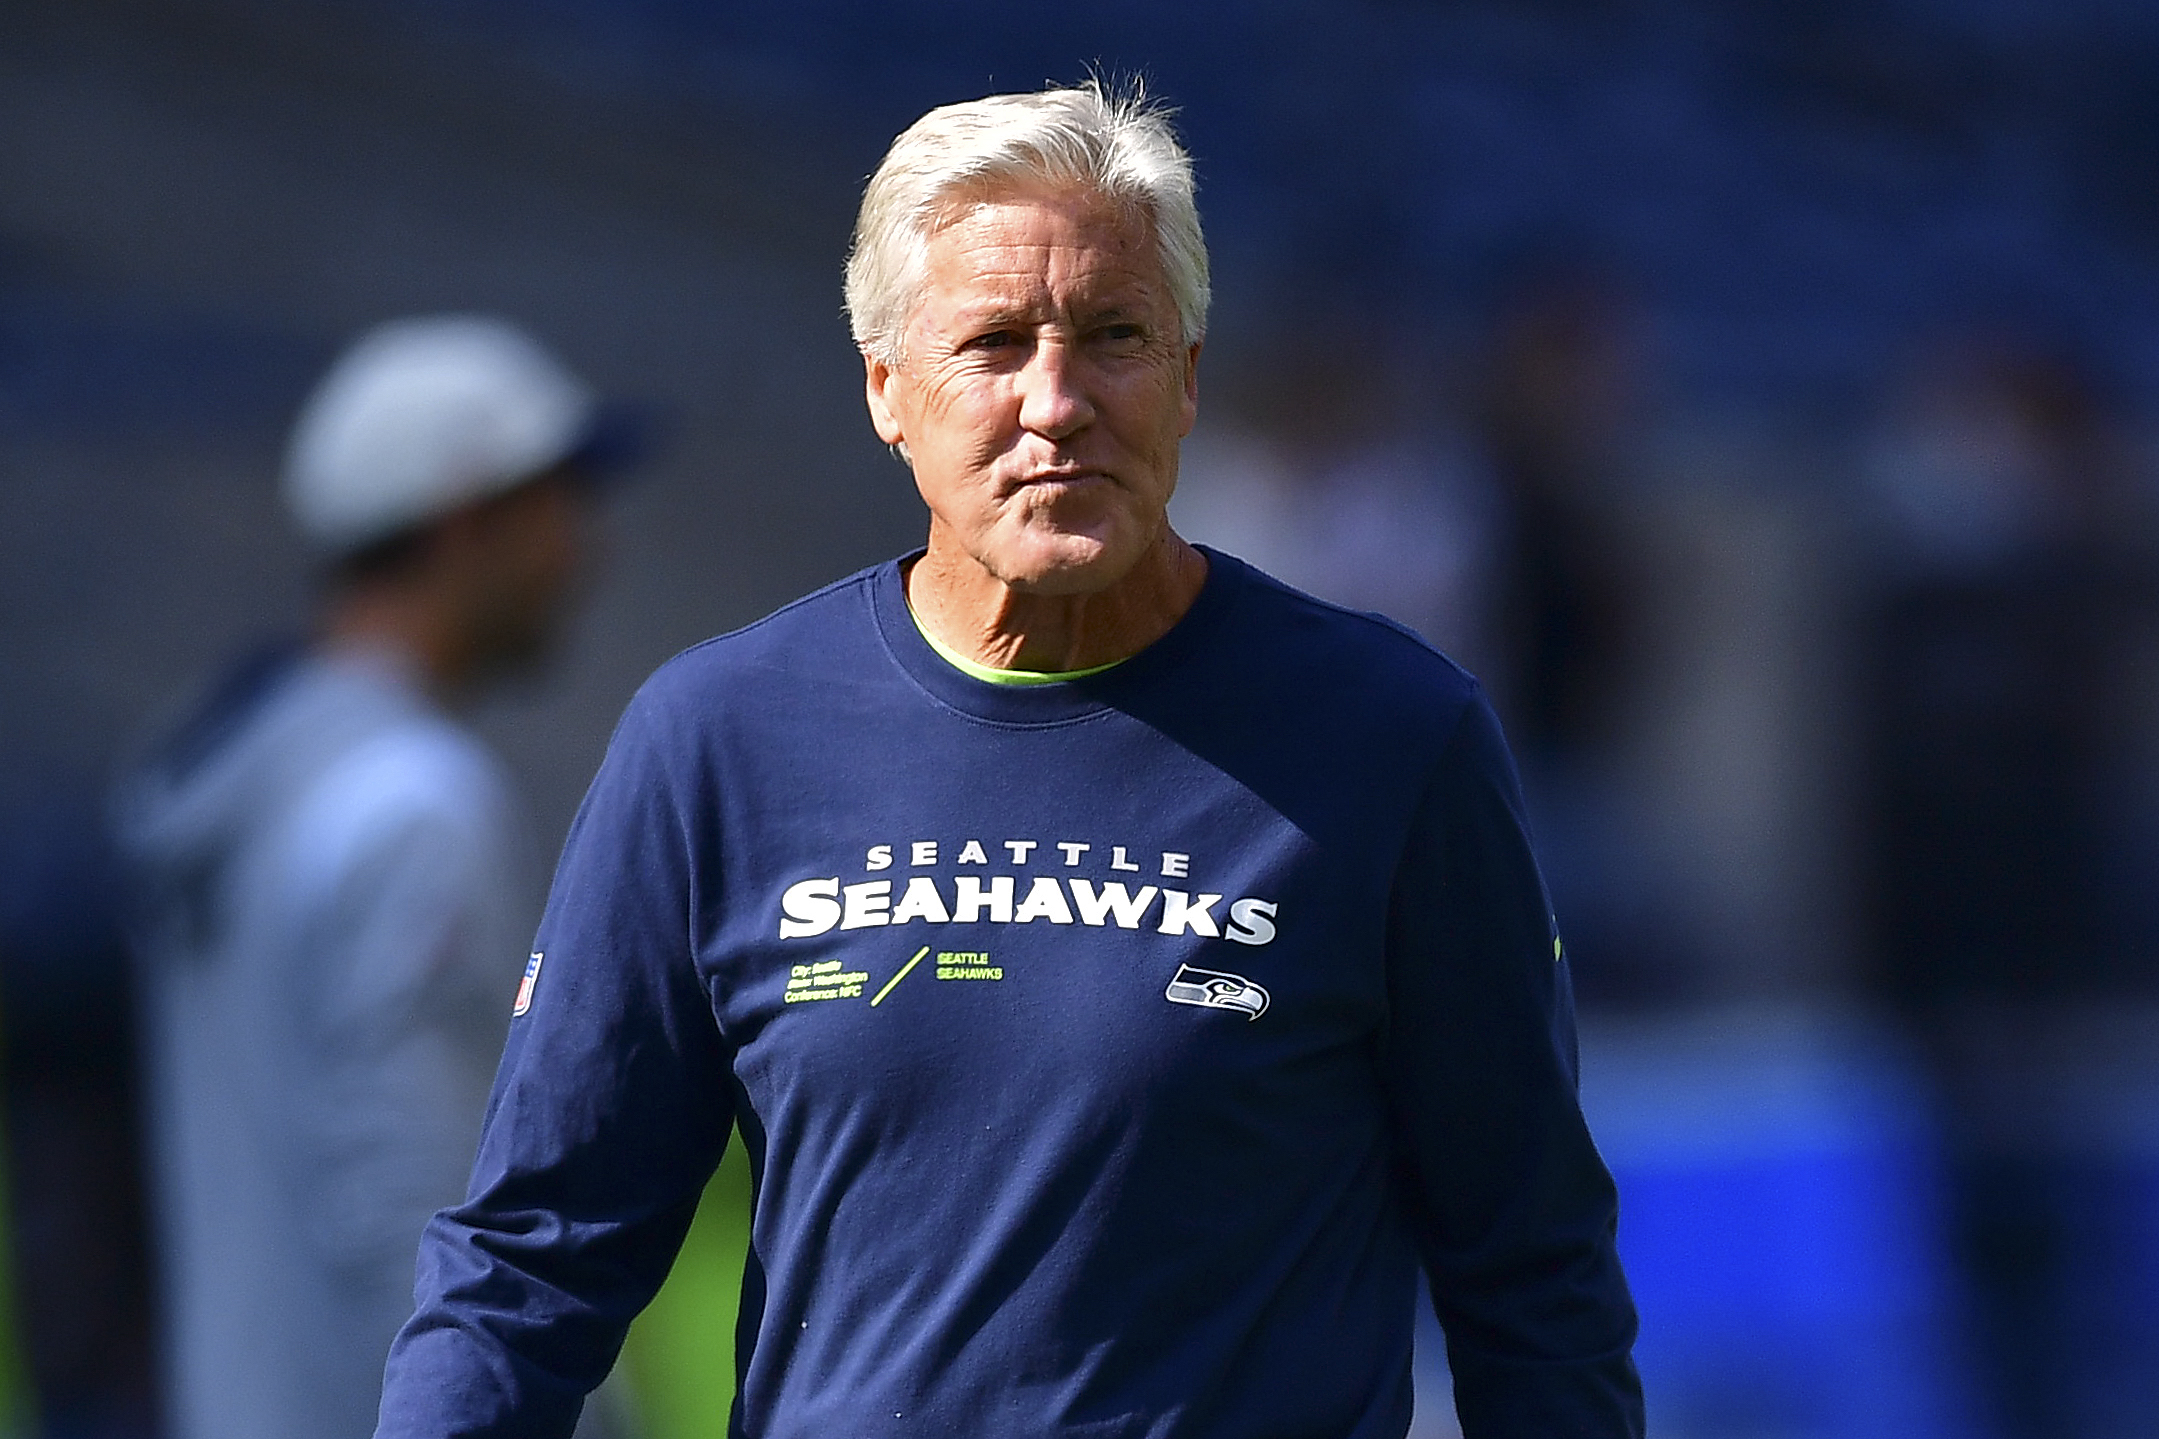 SEATTLE, WASHINGTON - SEPTEMBER 12: Head coach Pete Carroll of the Seattle Seahawks looks on before a game against the Denver Broncos at Lumen Field on September 12, 2022 in Seattle, Washington. (Photo by Jane Gershovich/Getty Images)